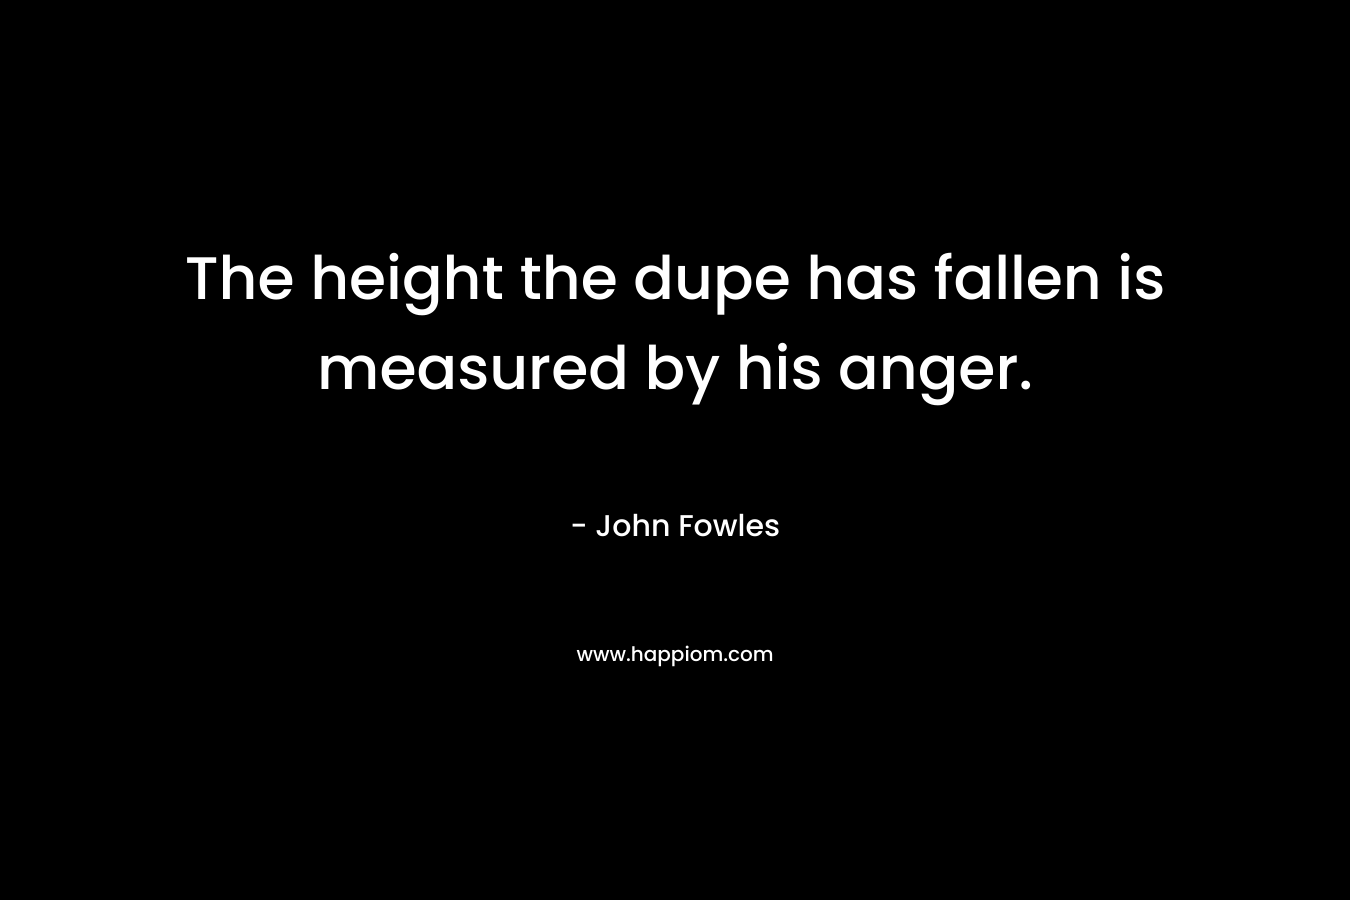 The height the dupe has fallen is measured by his anger.